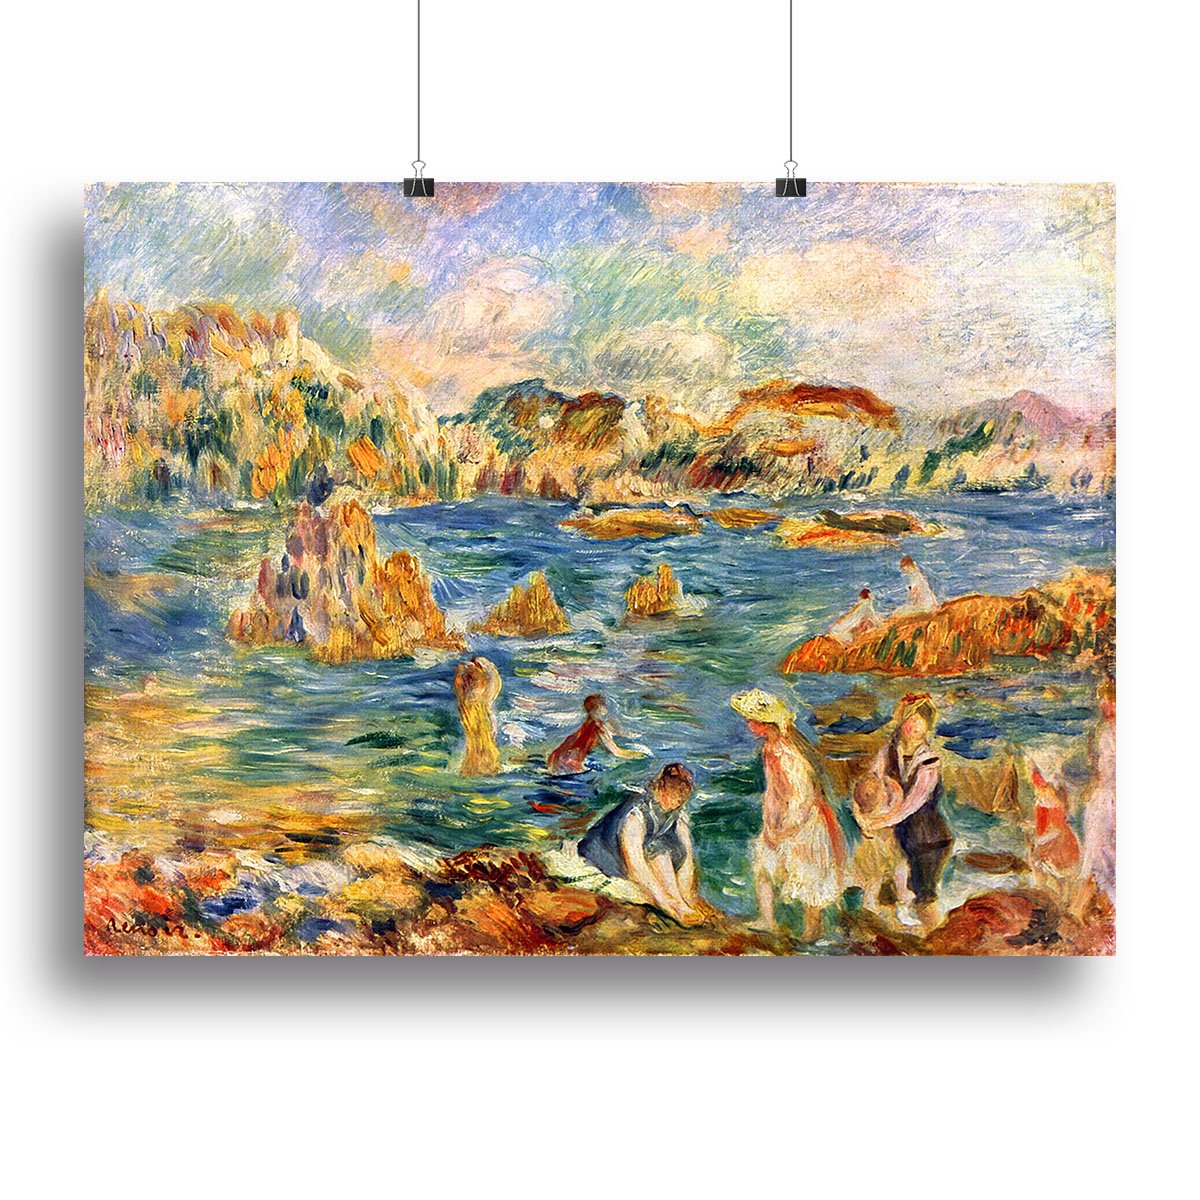 At the beach of Guernesey by Renoir Canvas Print or Poster